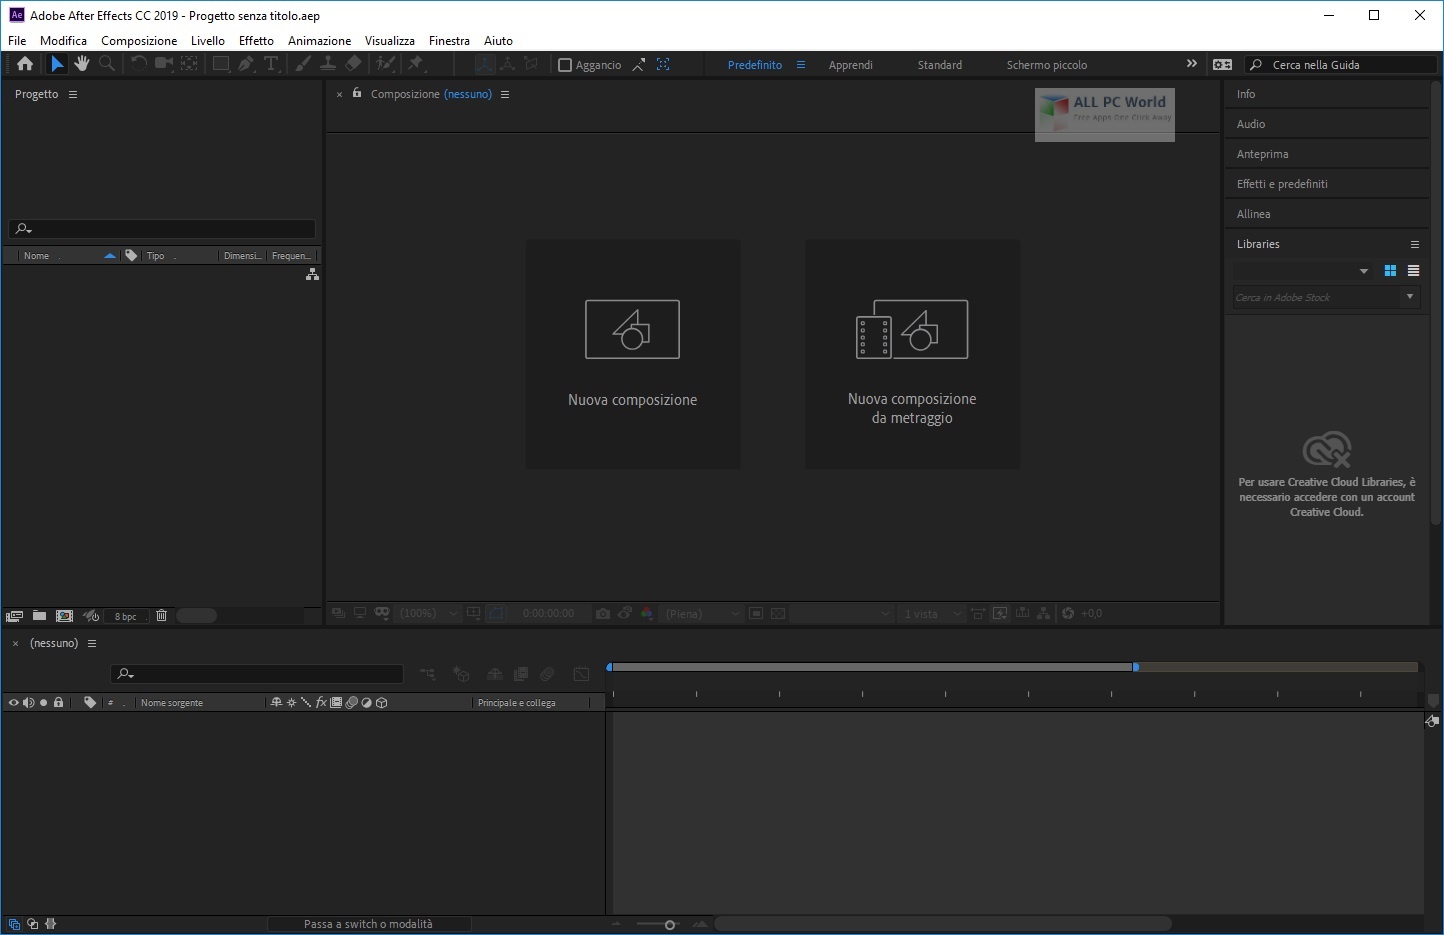 Adobe After Effects CC 2020 v17.0.5